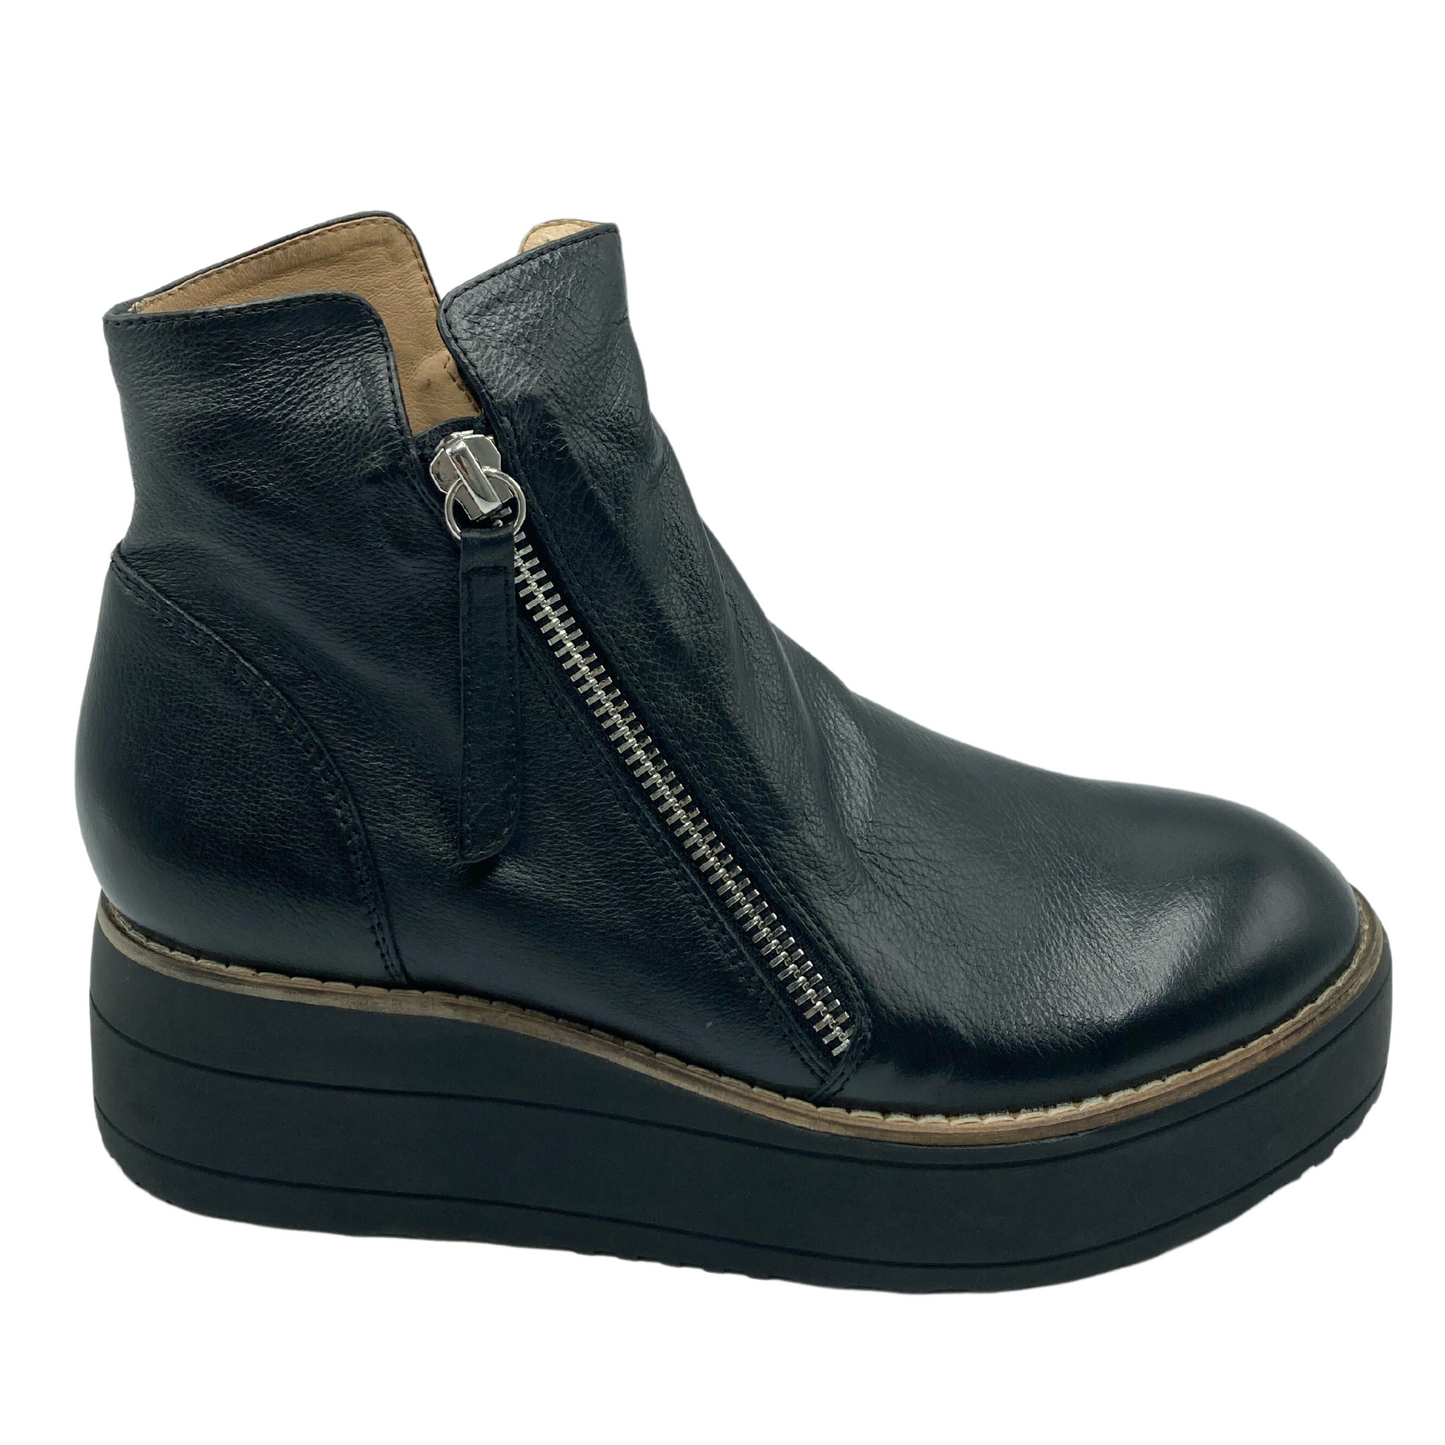 Right facing profile view of black leather wedge short boot with angled silver zipper